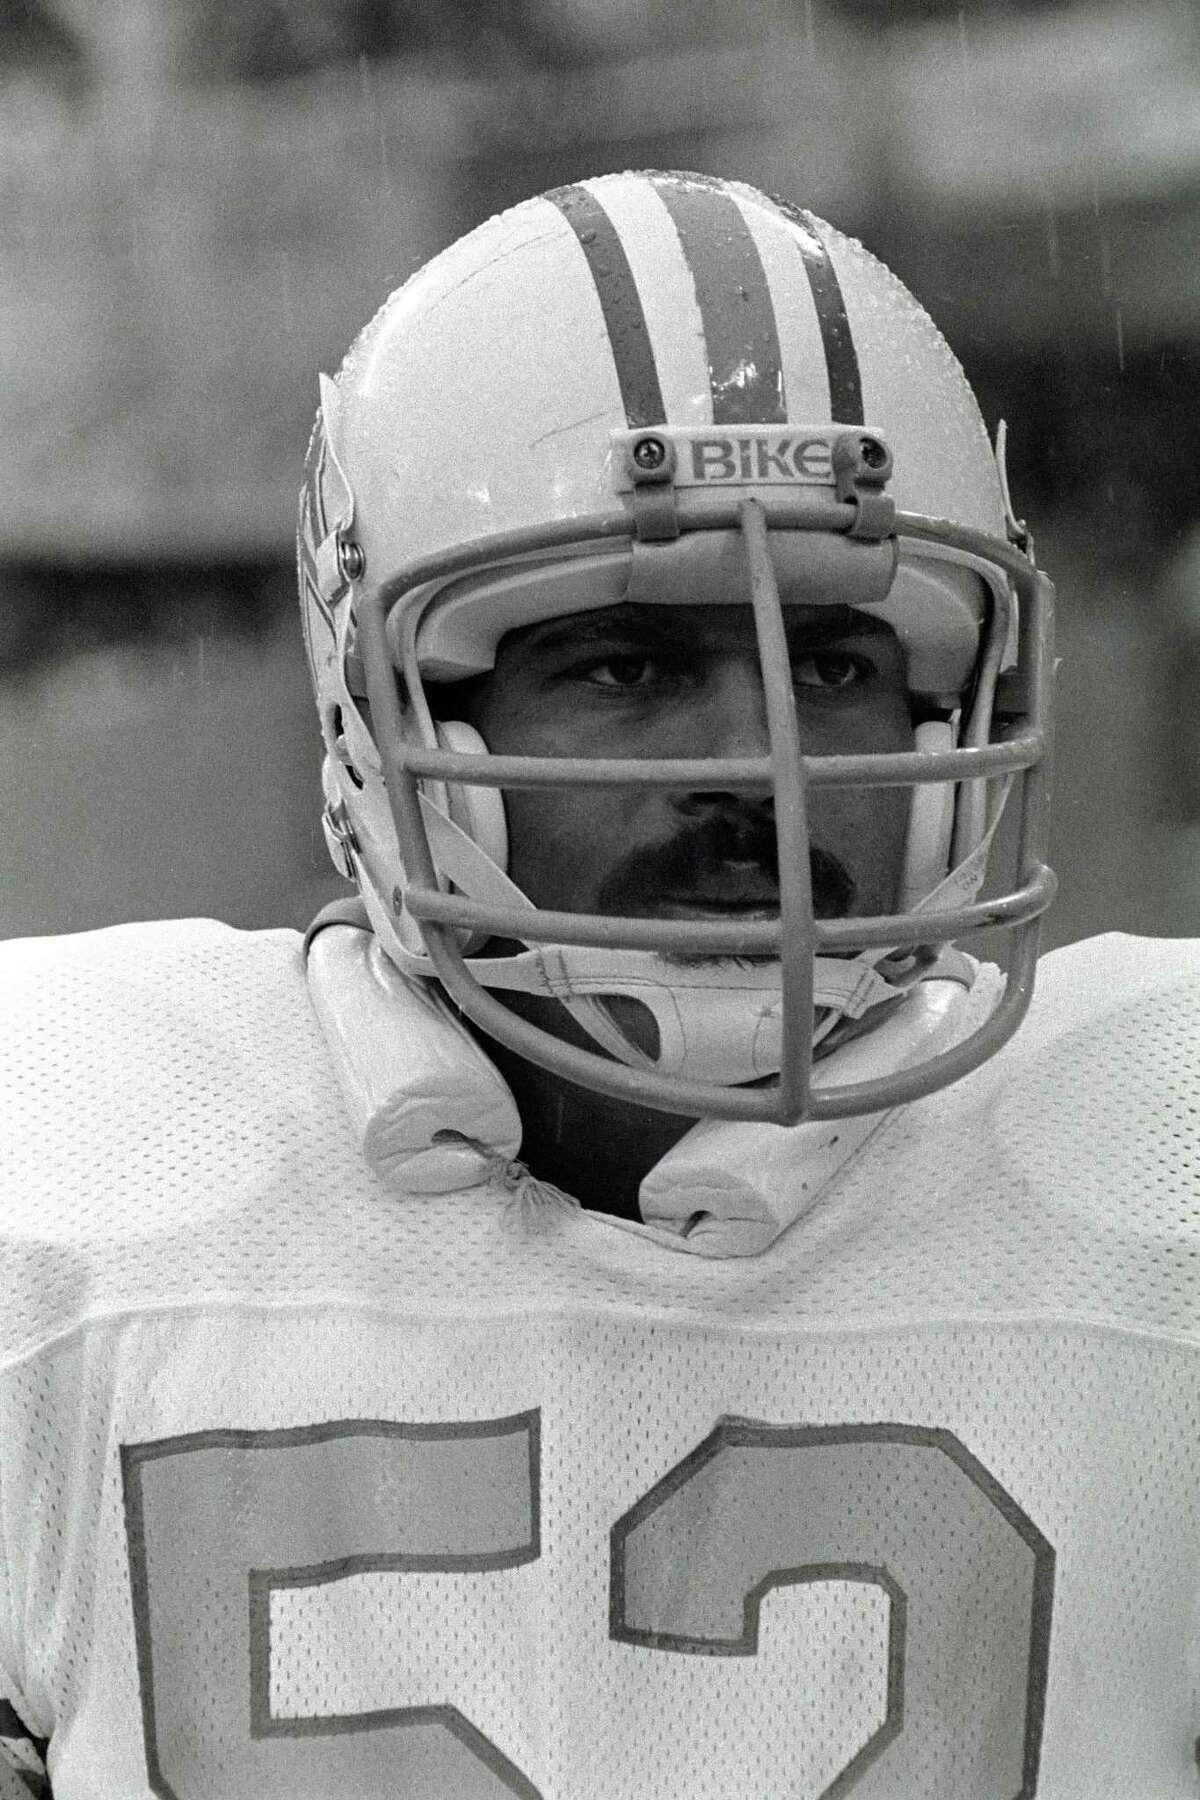 Robert Brazile was a fixture at linebacker for the Oilers from 1975-84. spanning the height of the Luv Ya Blue hysteria in Houston.